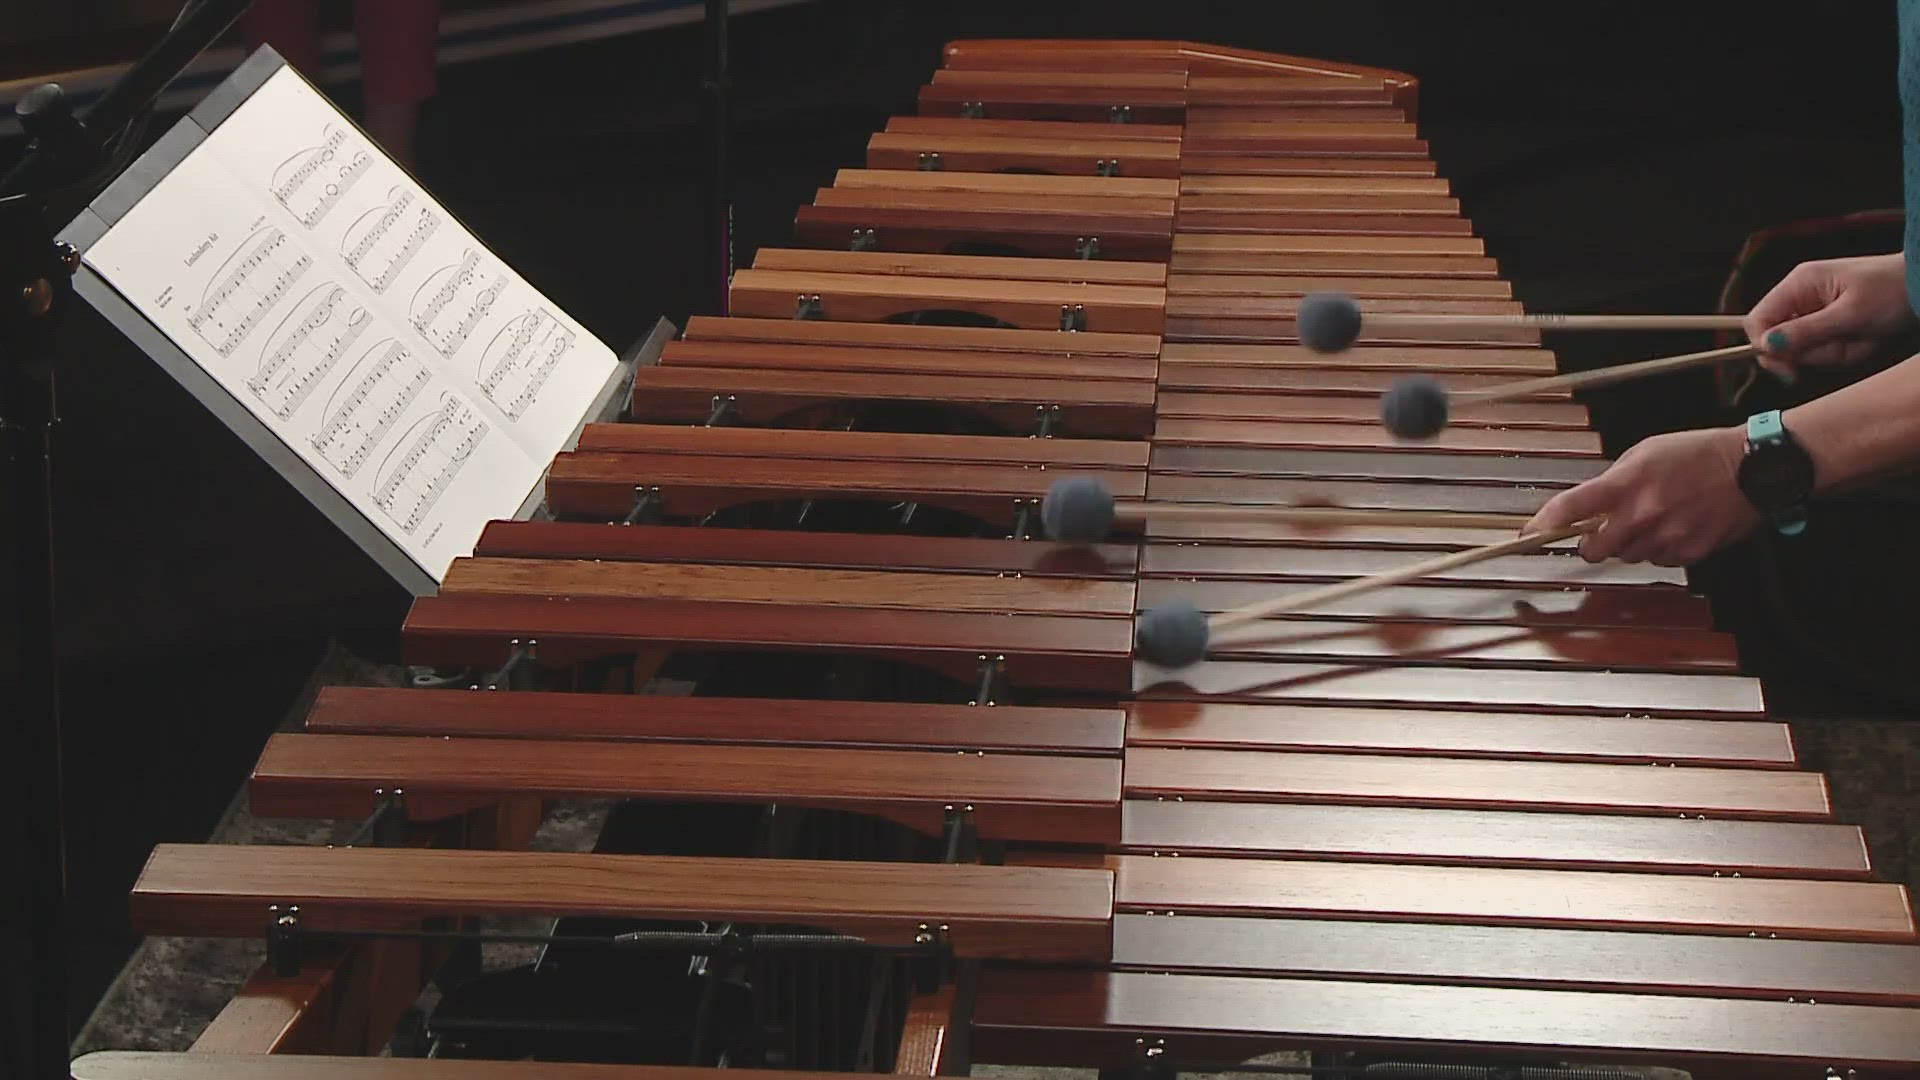 Kate Beever, who is a licensed musical therapist, has been playing the marimba since she was a little girl.